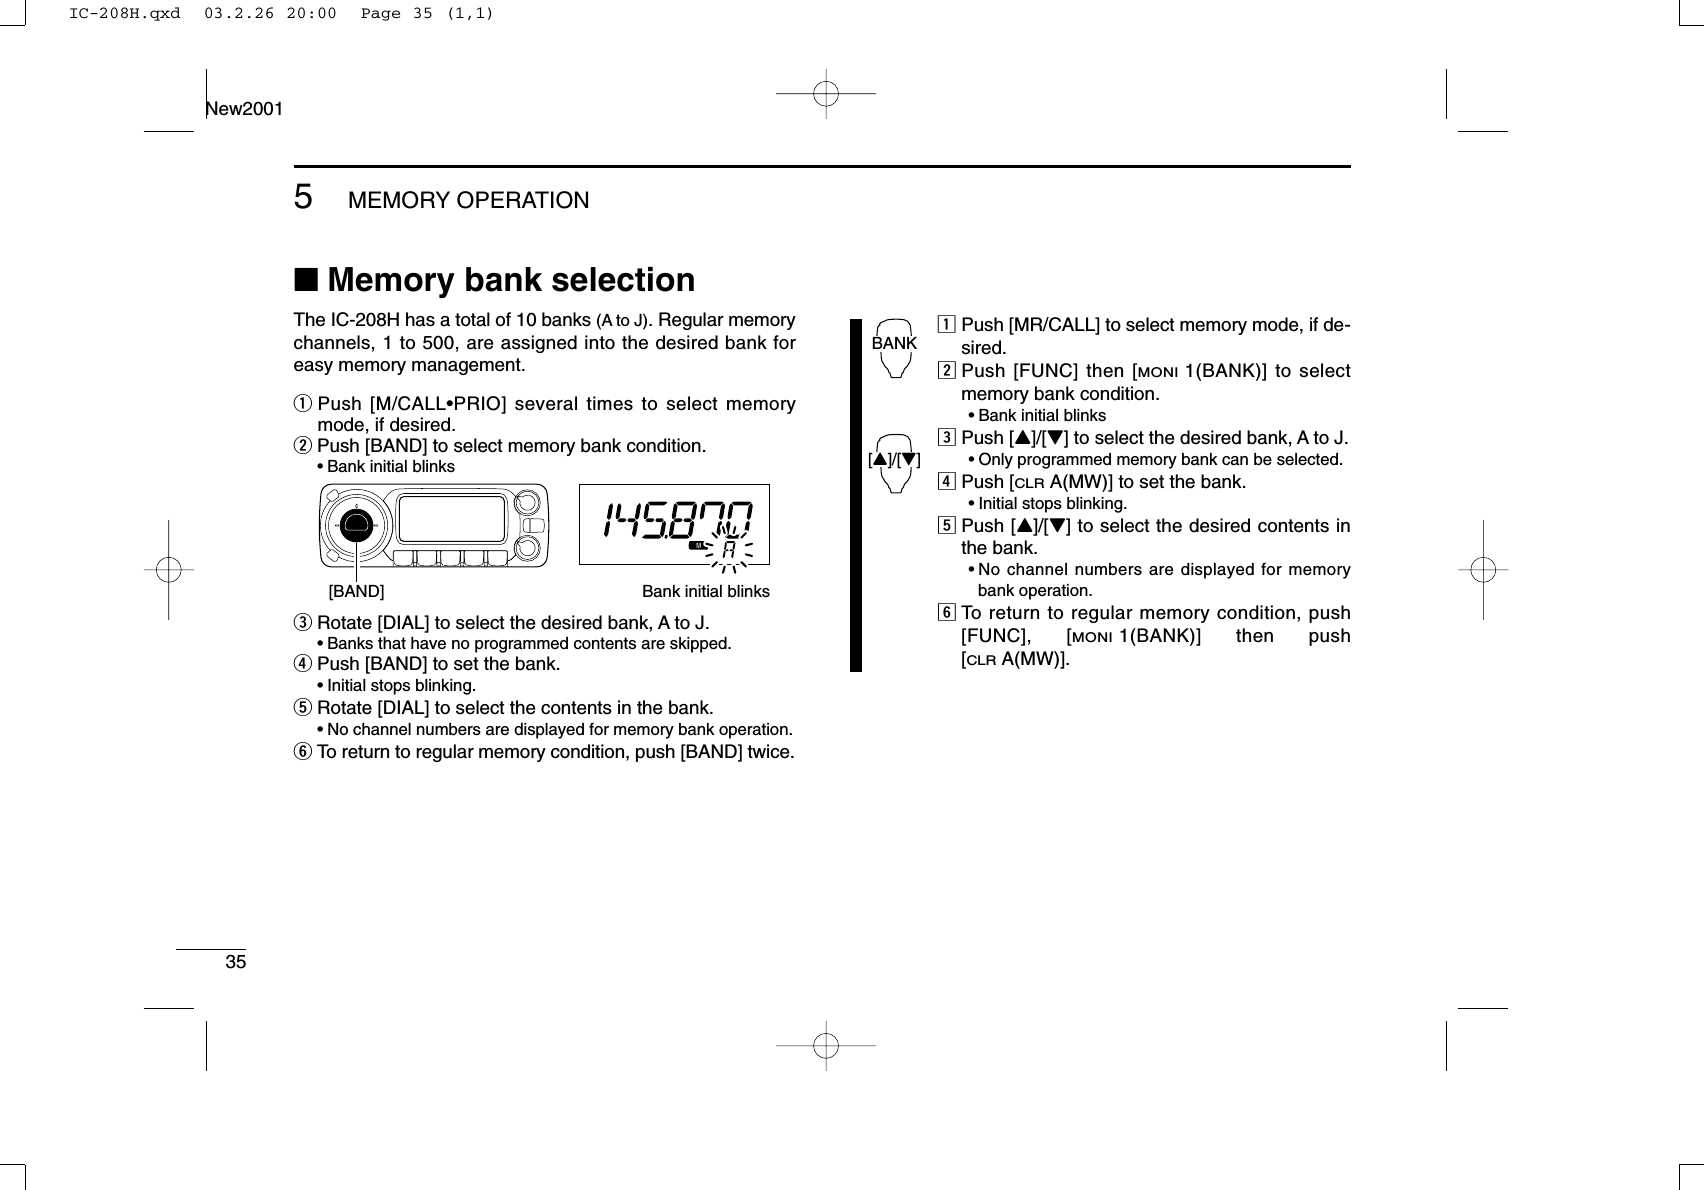 35New20015MEMORY OPERATION■Memory bank selectionThe IC-208H has a total of 10 banks (A to J). Regular memorychannels, 1 to 500, are assigned into the desired bank foreasy memory management.qPush [M/CALL•PRIO] several times to select memorymode, if desired.wPush [BAND] to select memory bank condition.•Bank initial blinkseRotate [DIAL] to select the desired bank, A to J.•Banks that have no programmed contents are skipped.rPush [BAND] to set the bank.•Initial stops blinking.tRotate [DIAL] to select the contents in the bank.•No channel numbers are displayed for memory bank operation.yTo return to regular memory condition, push [BAND] twice.zPush [MR/CALL] to select memory mode, if de-sired.xPush [FUNC] then [MONI1(BANK)] to selectmemory bank condition.•Bank initial blinkscPush [Y]/[Z] to select the desired bank, A to J.•Only programmed memory bank can be selected.vPush [CLRA(MW)] to set the bank.•Initial stops blinking.bPush [Y]/[Z] to select the desired contents inthe bank.•No channel numbers are displayed for memorybank operation.nTo return to regular memory condition, push[FUNC], [MONI1(BANK)] then push[CLRA(MW)].BANK[Y]/[Z][BAND] Bank initial blinksIC-208H.qxd  03.2.26 20:00  Page 35 (1,1)